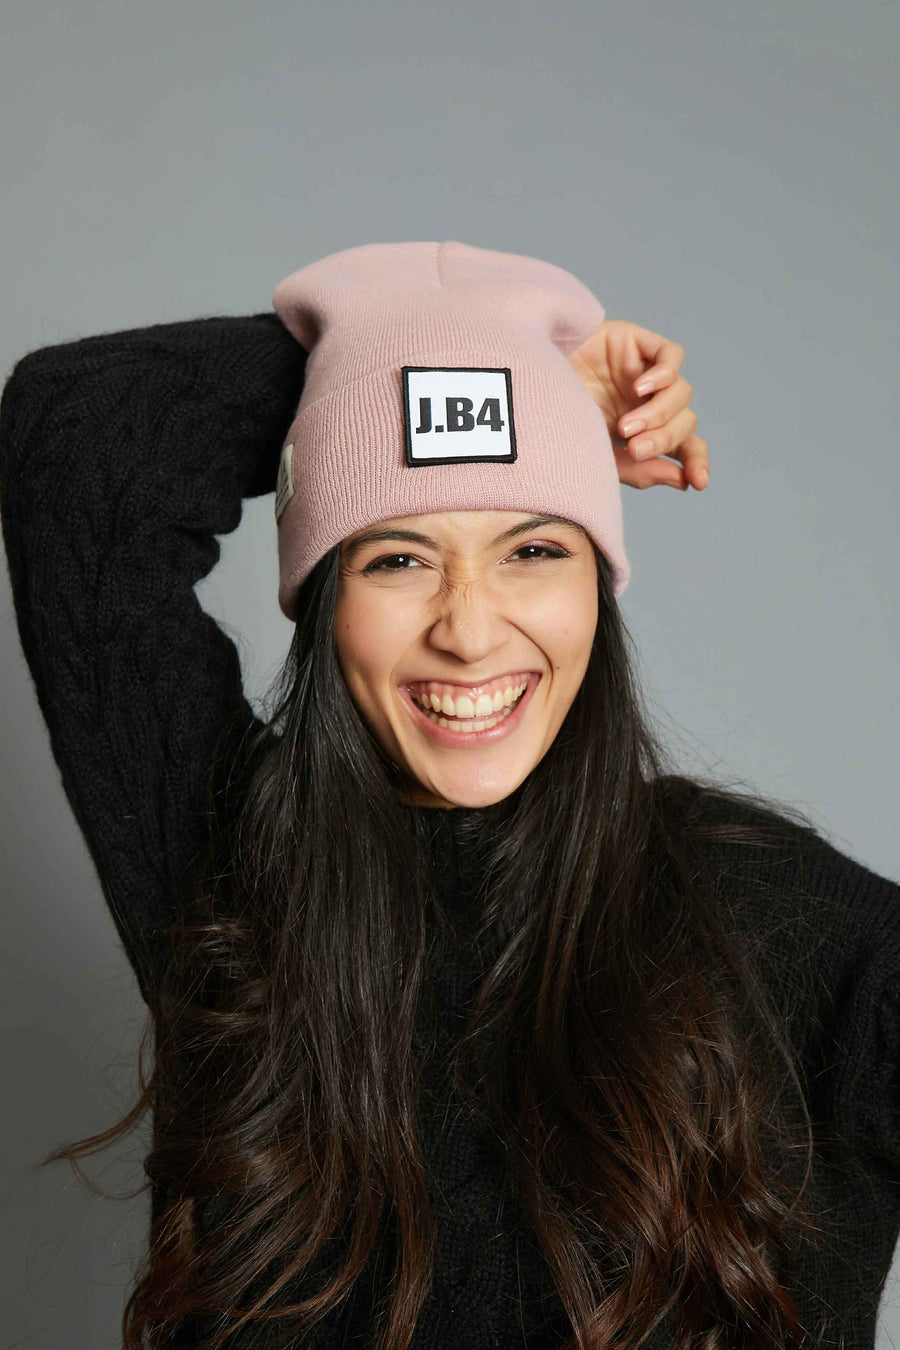 BEANIE MOOD OF THE DAY ROSA CIPRIA